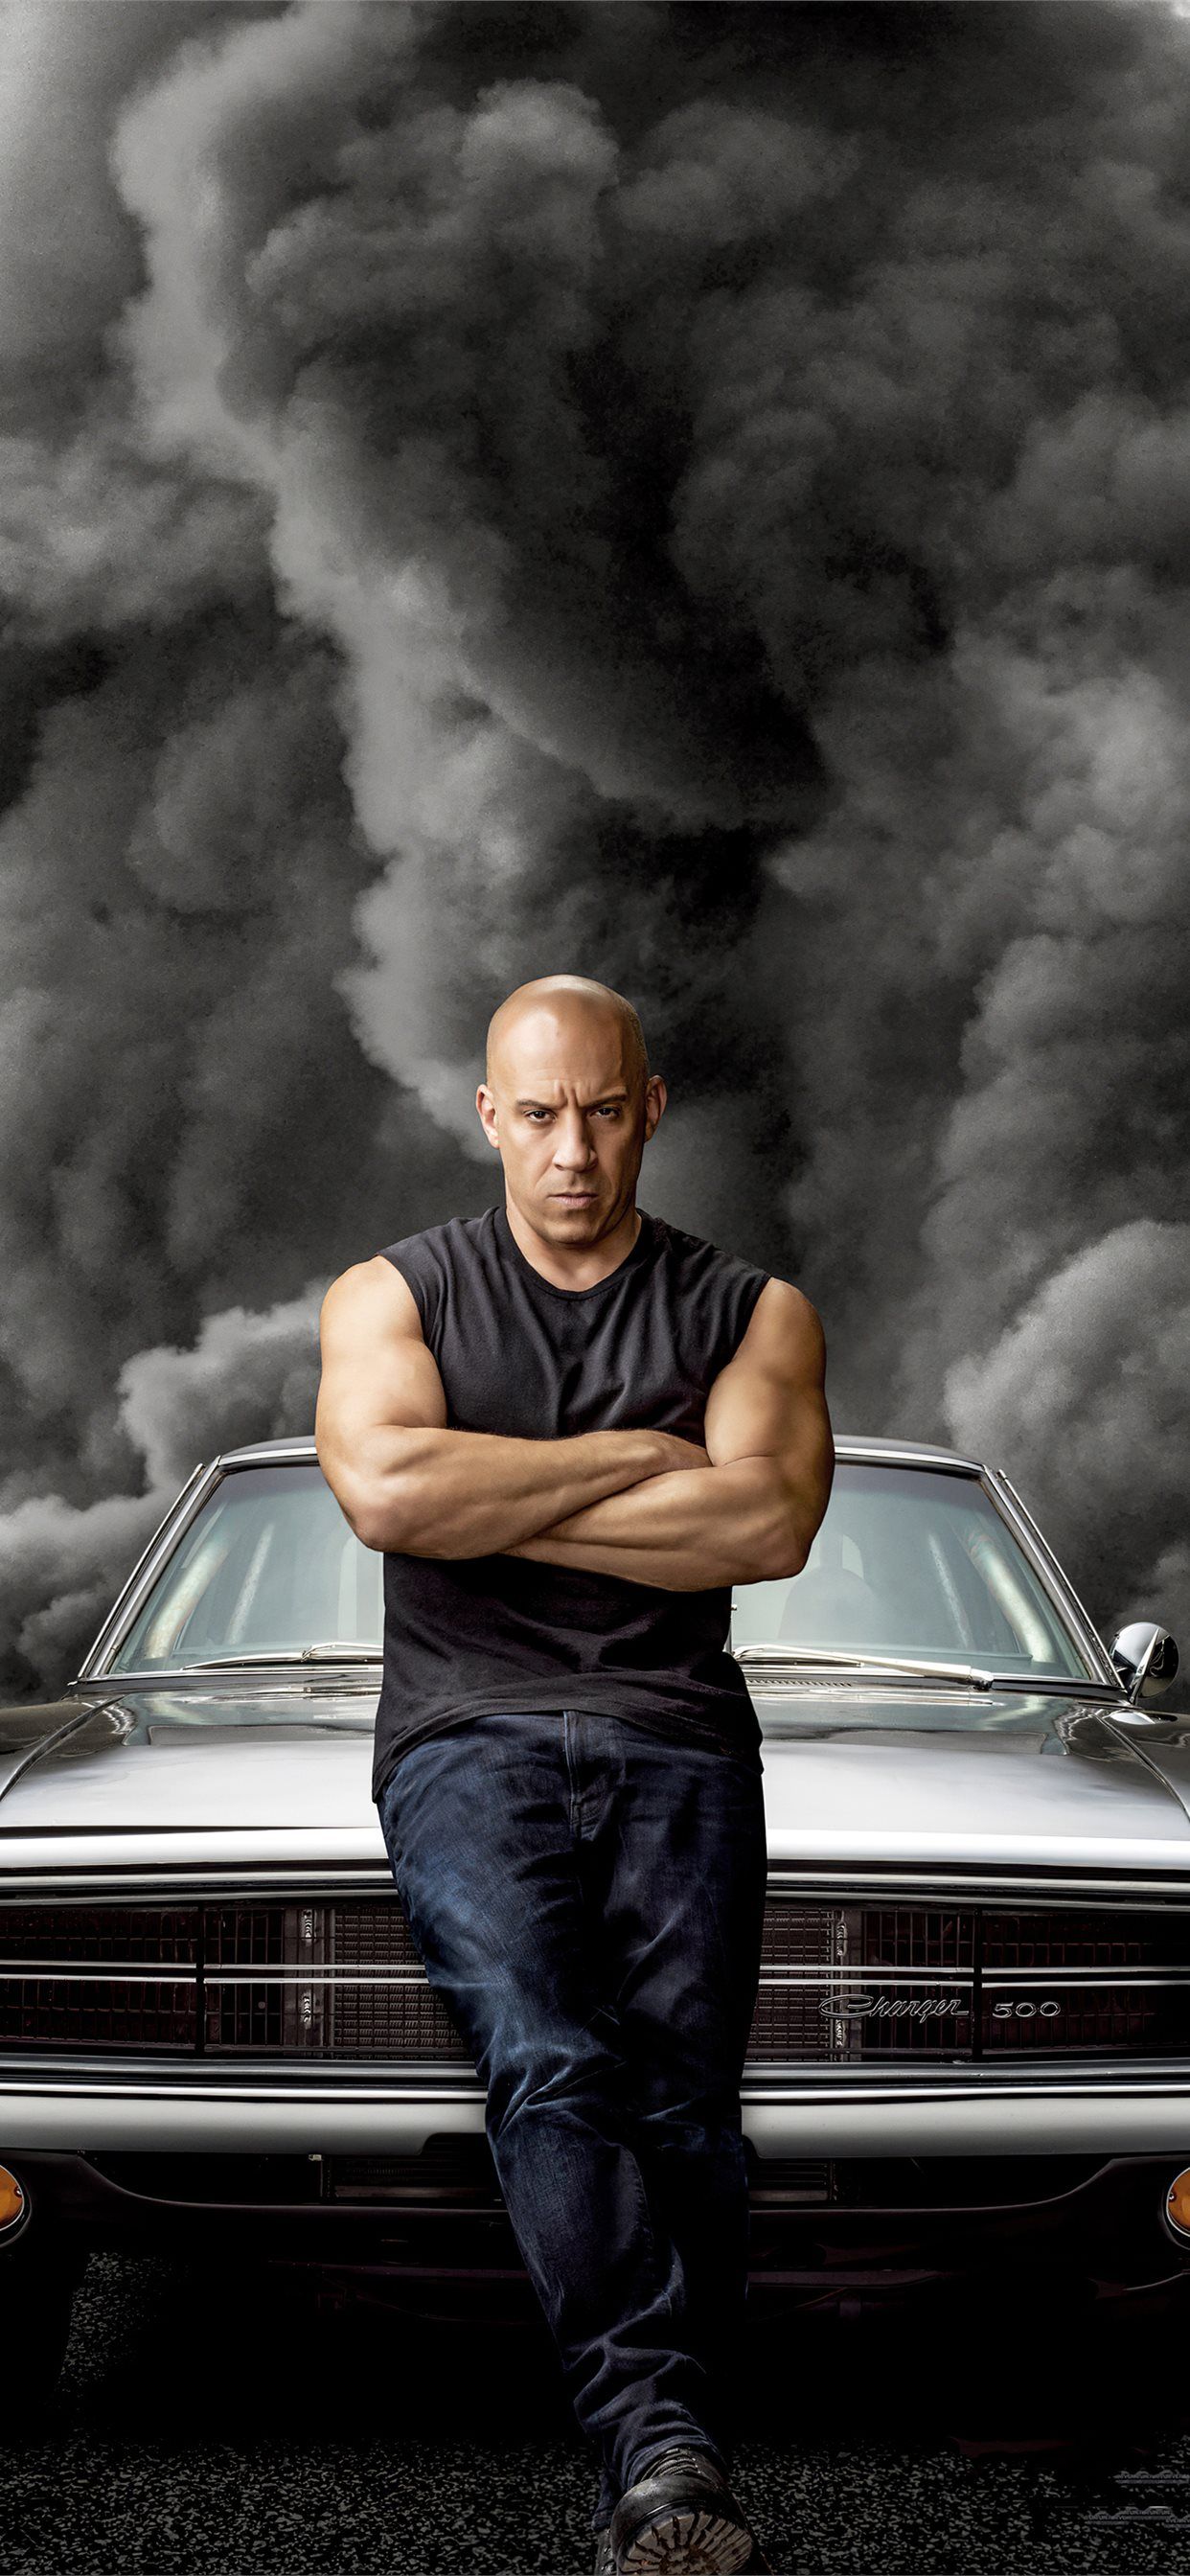 dominic toretto in fast and furious 9 2020 movie iPhone 11